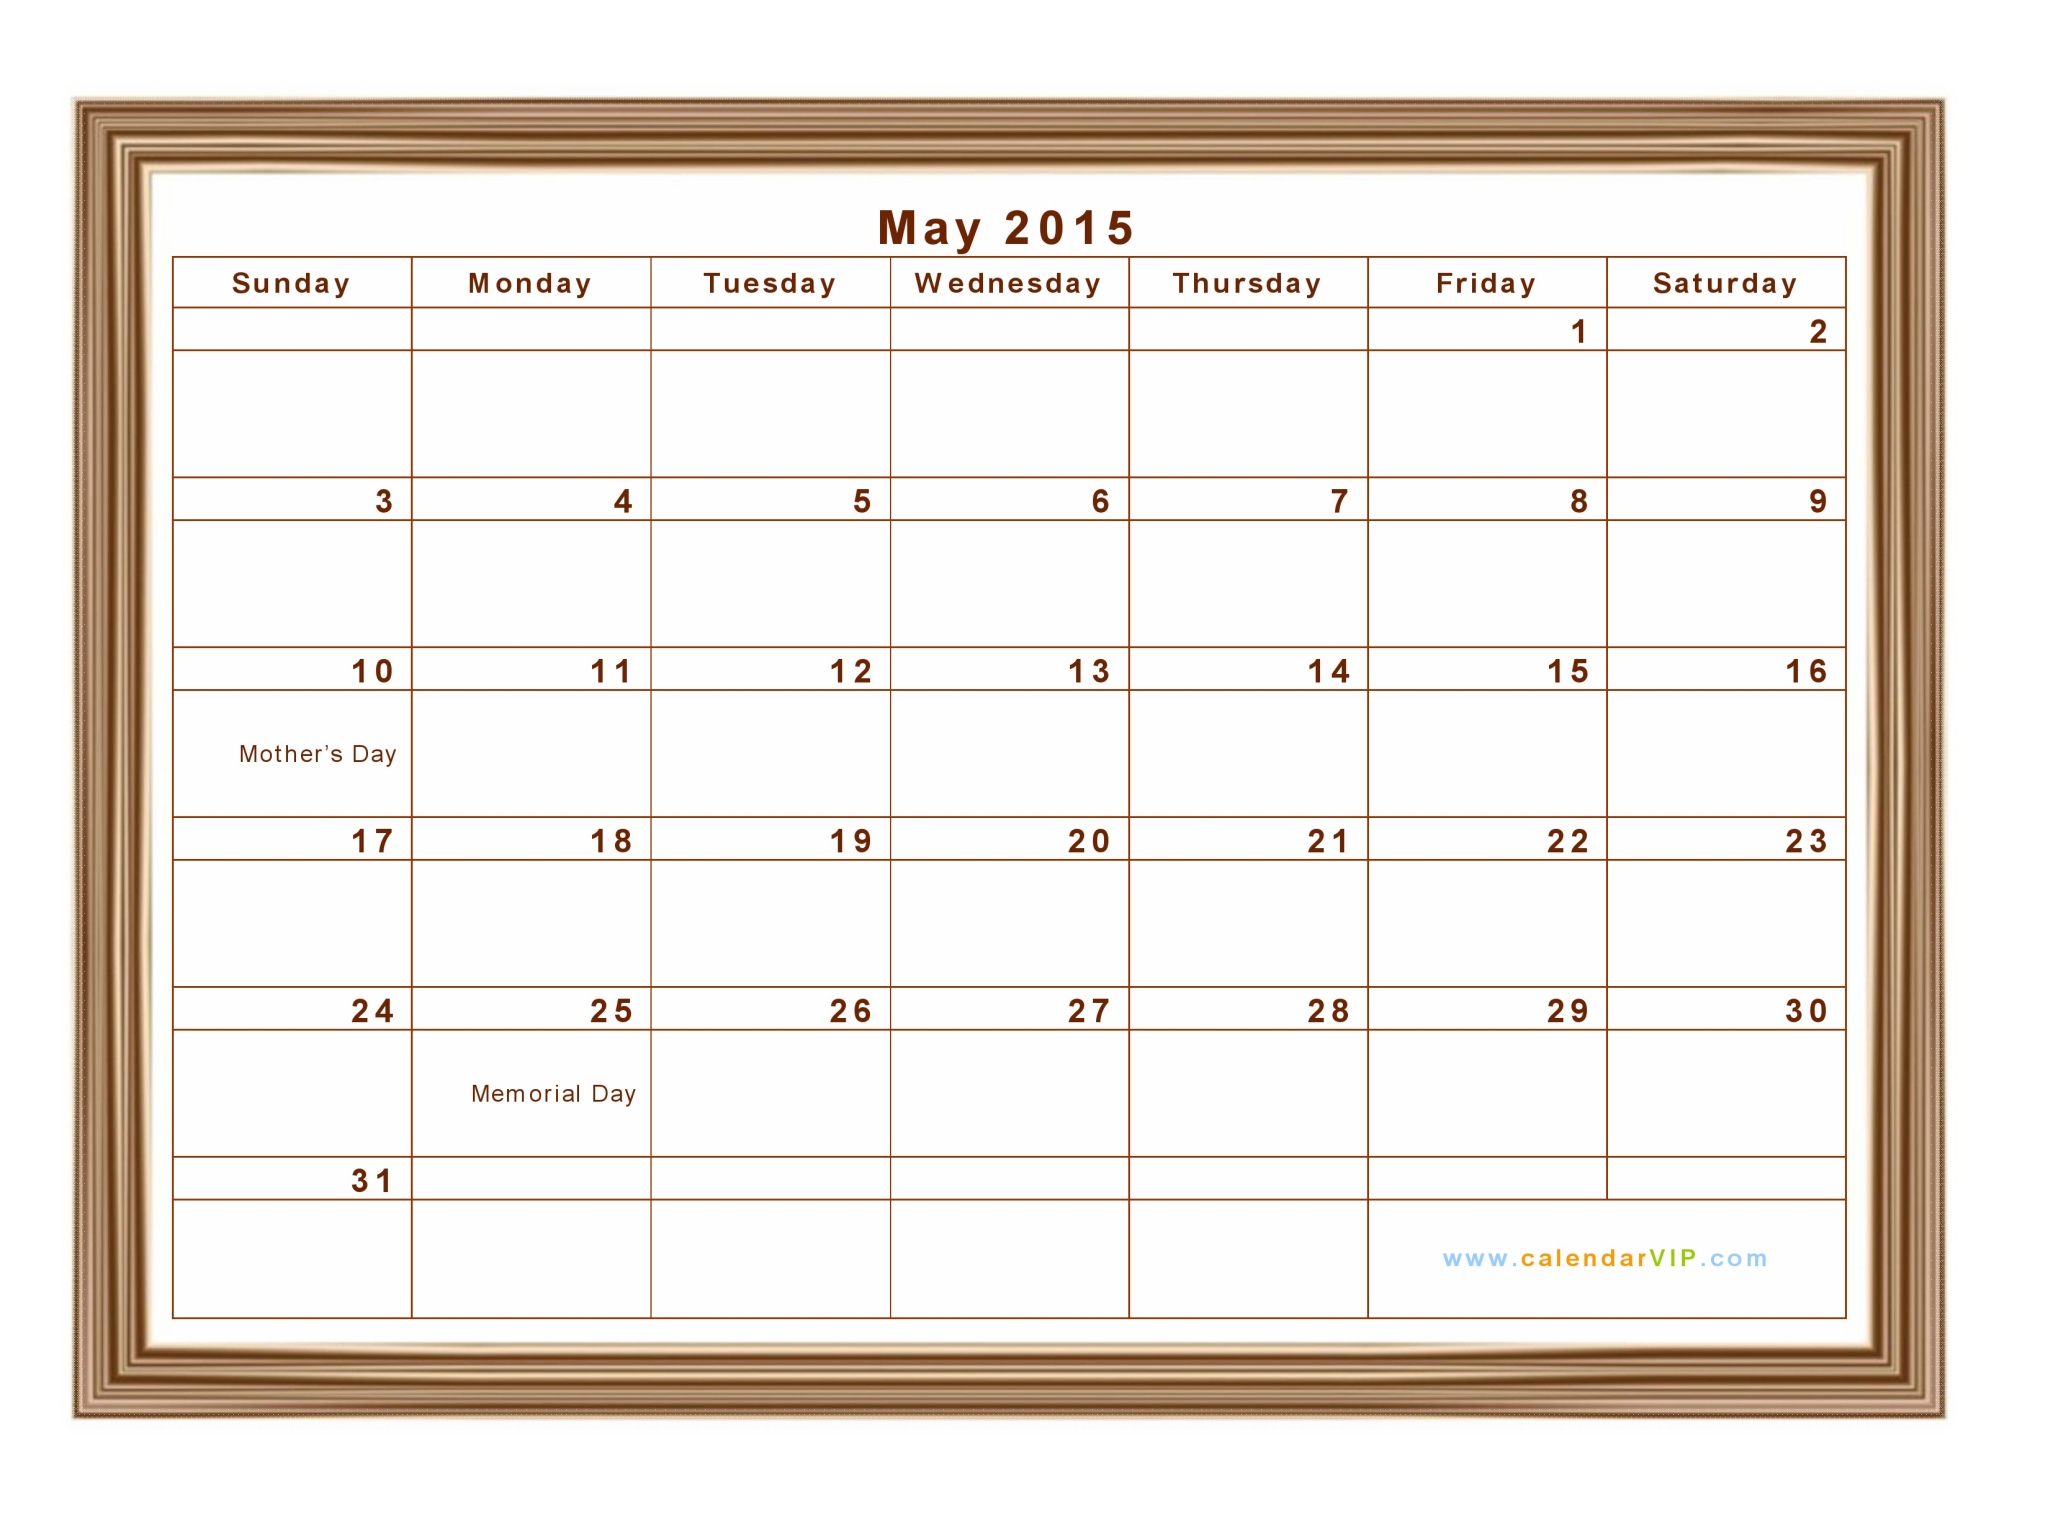 May 2015 Calendar with Holidays